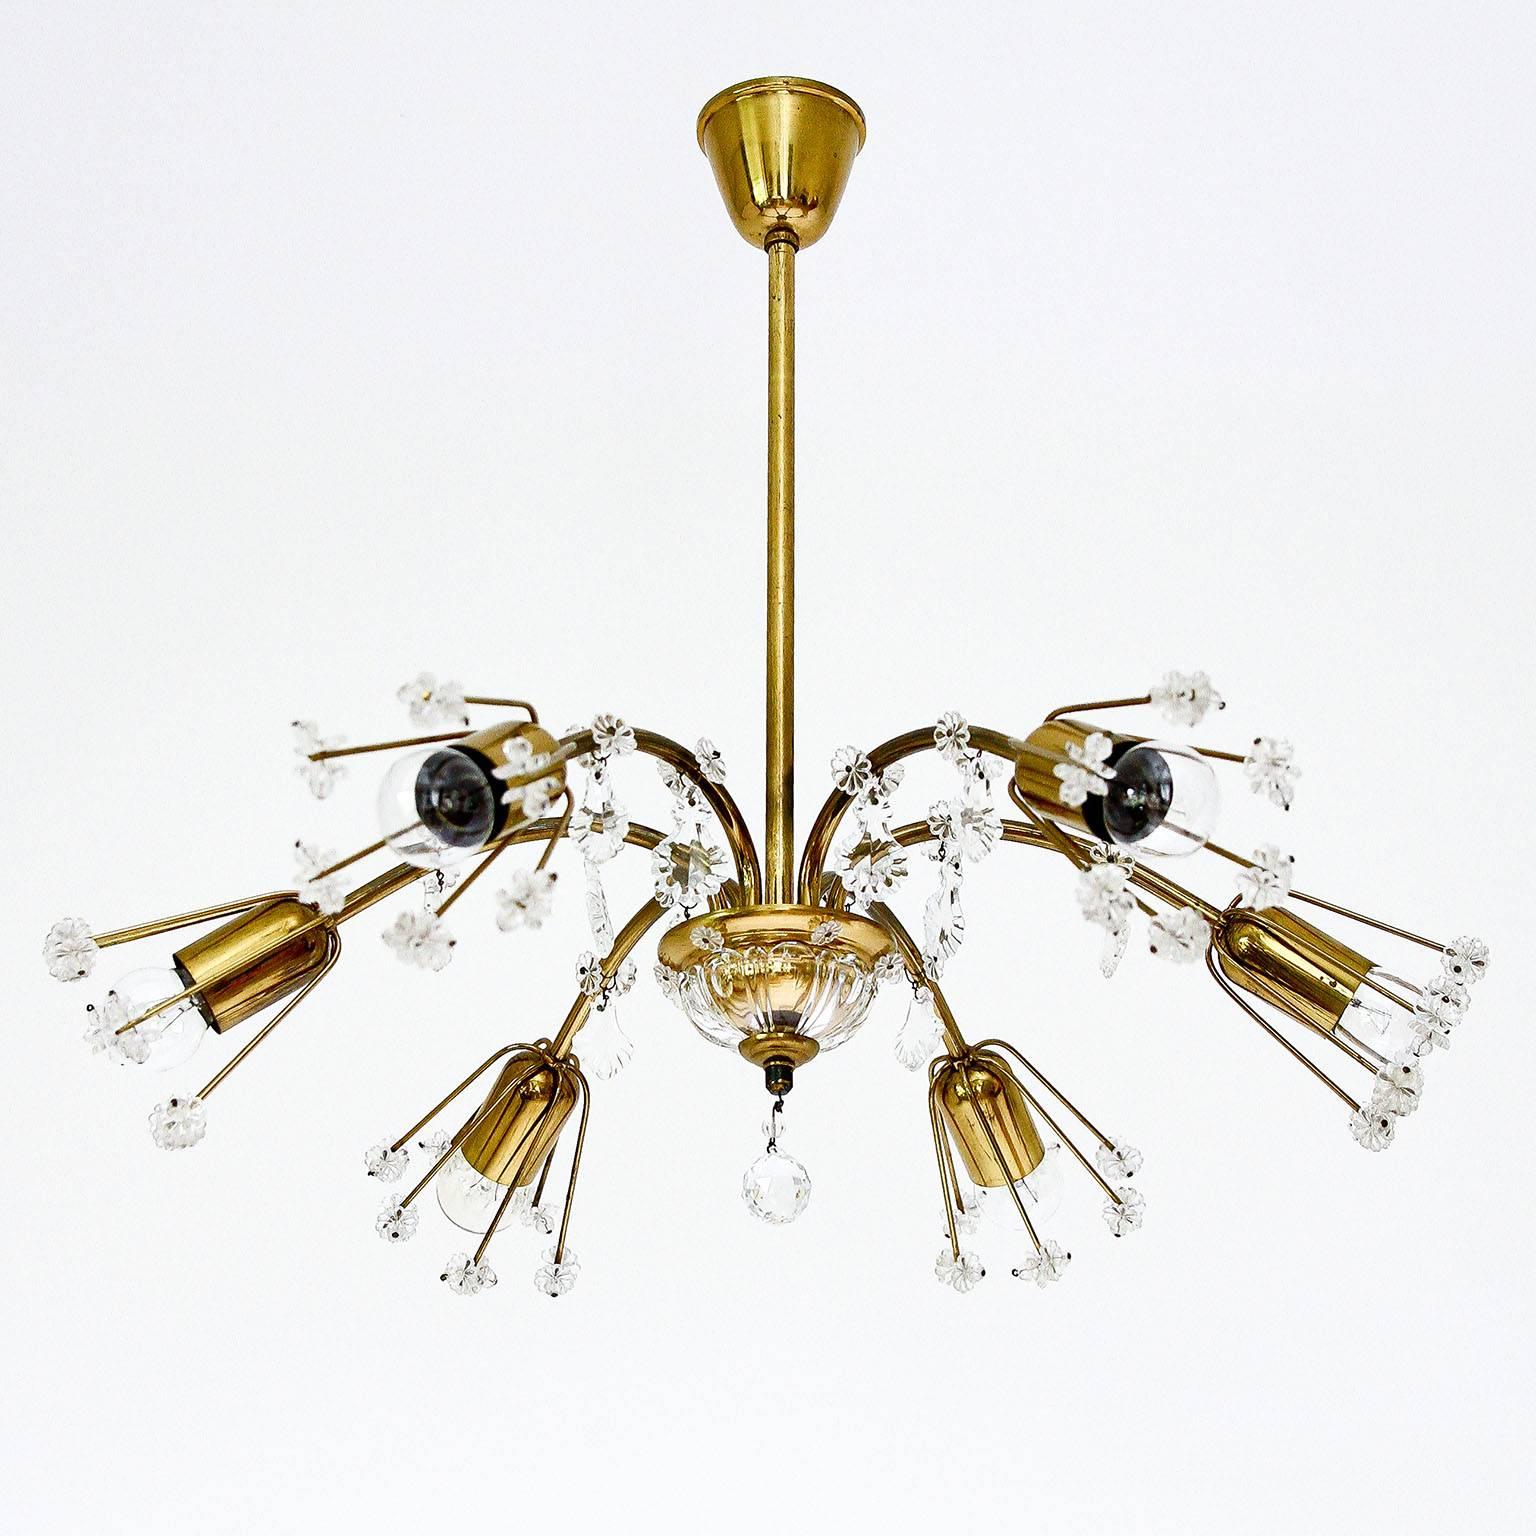 Mid-Century Modern Pair of Emil Stejnar Chandeliers or Flush Mount Lights, Patinated Brass, 1950s